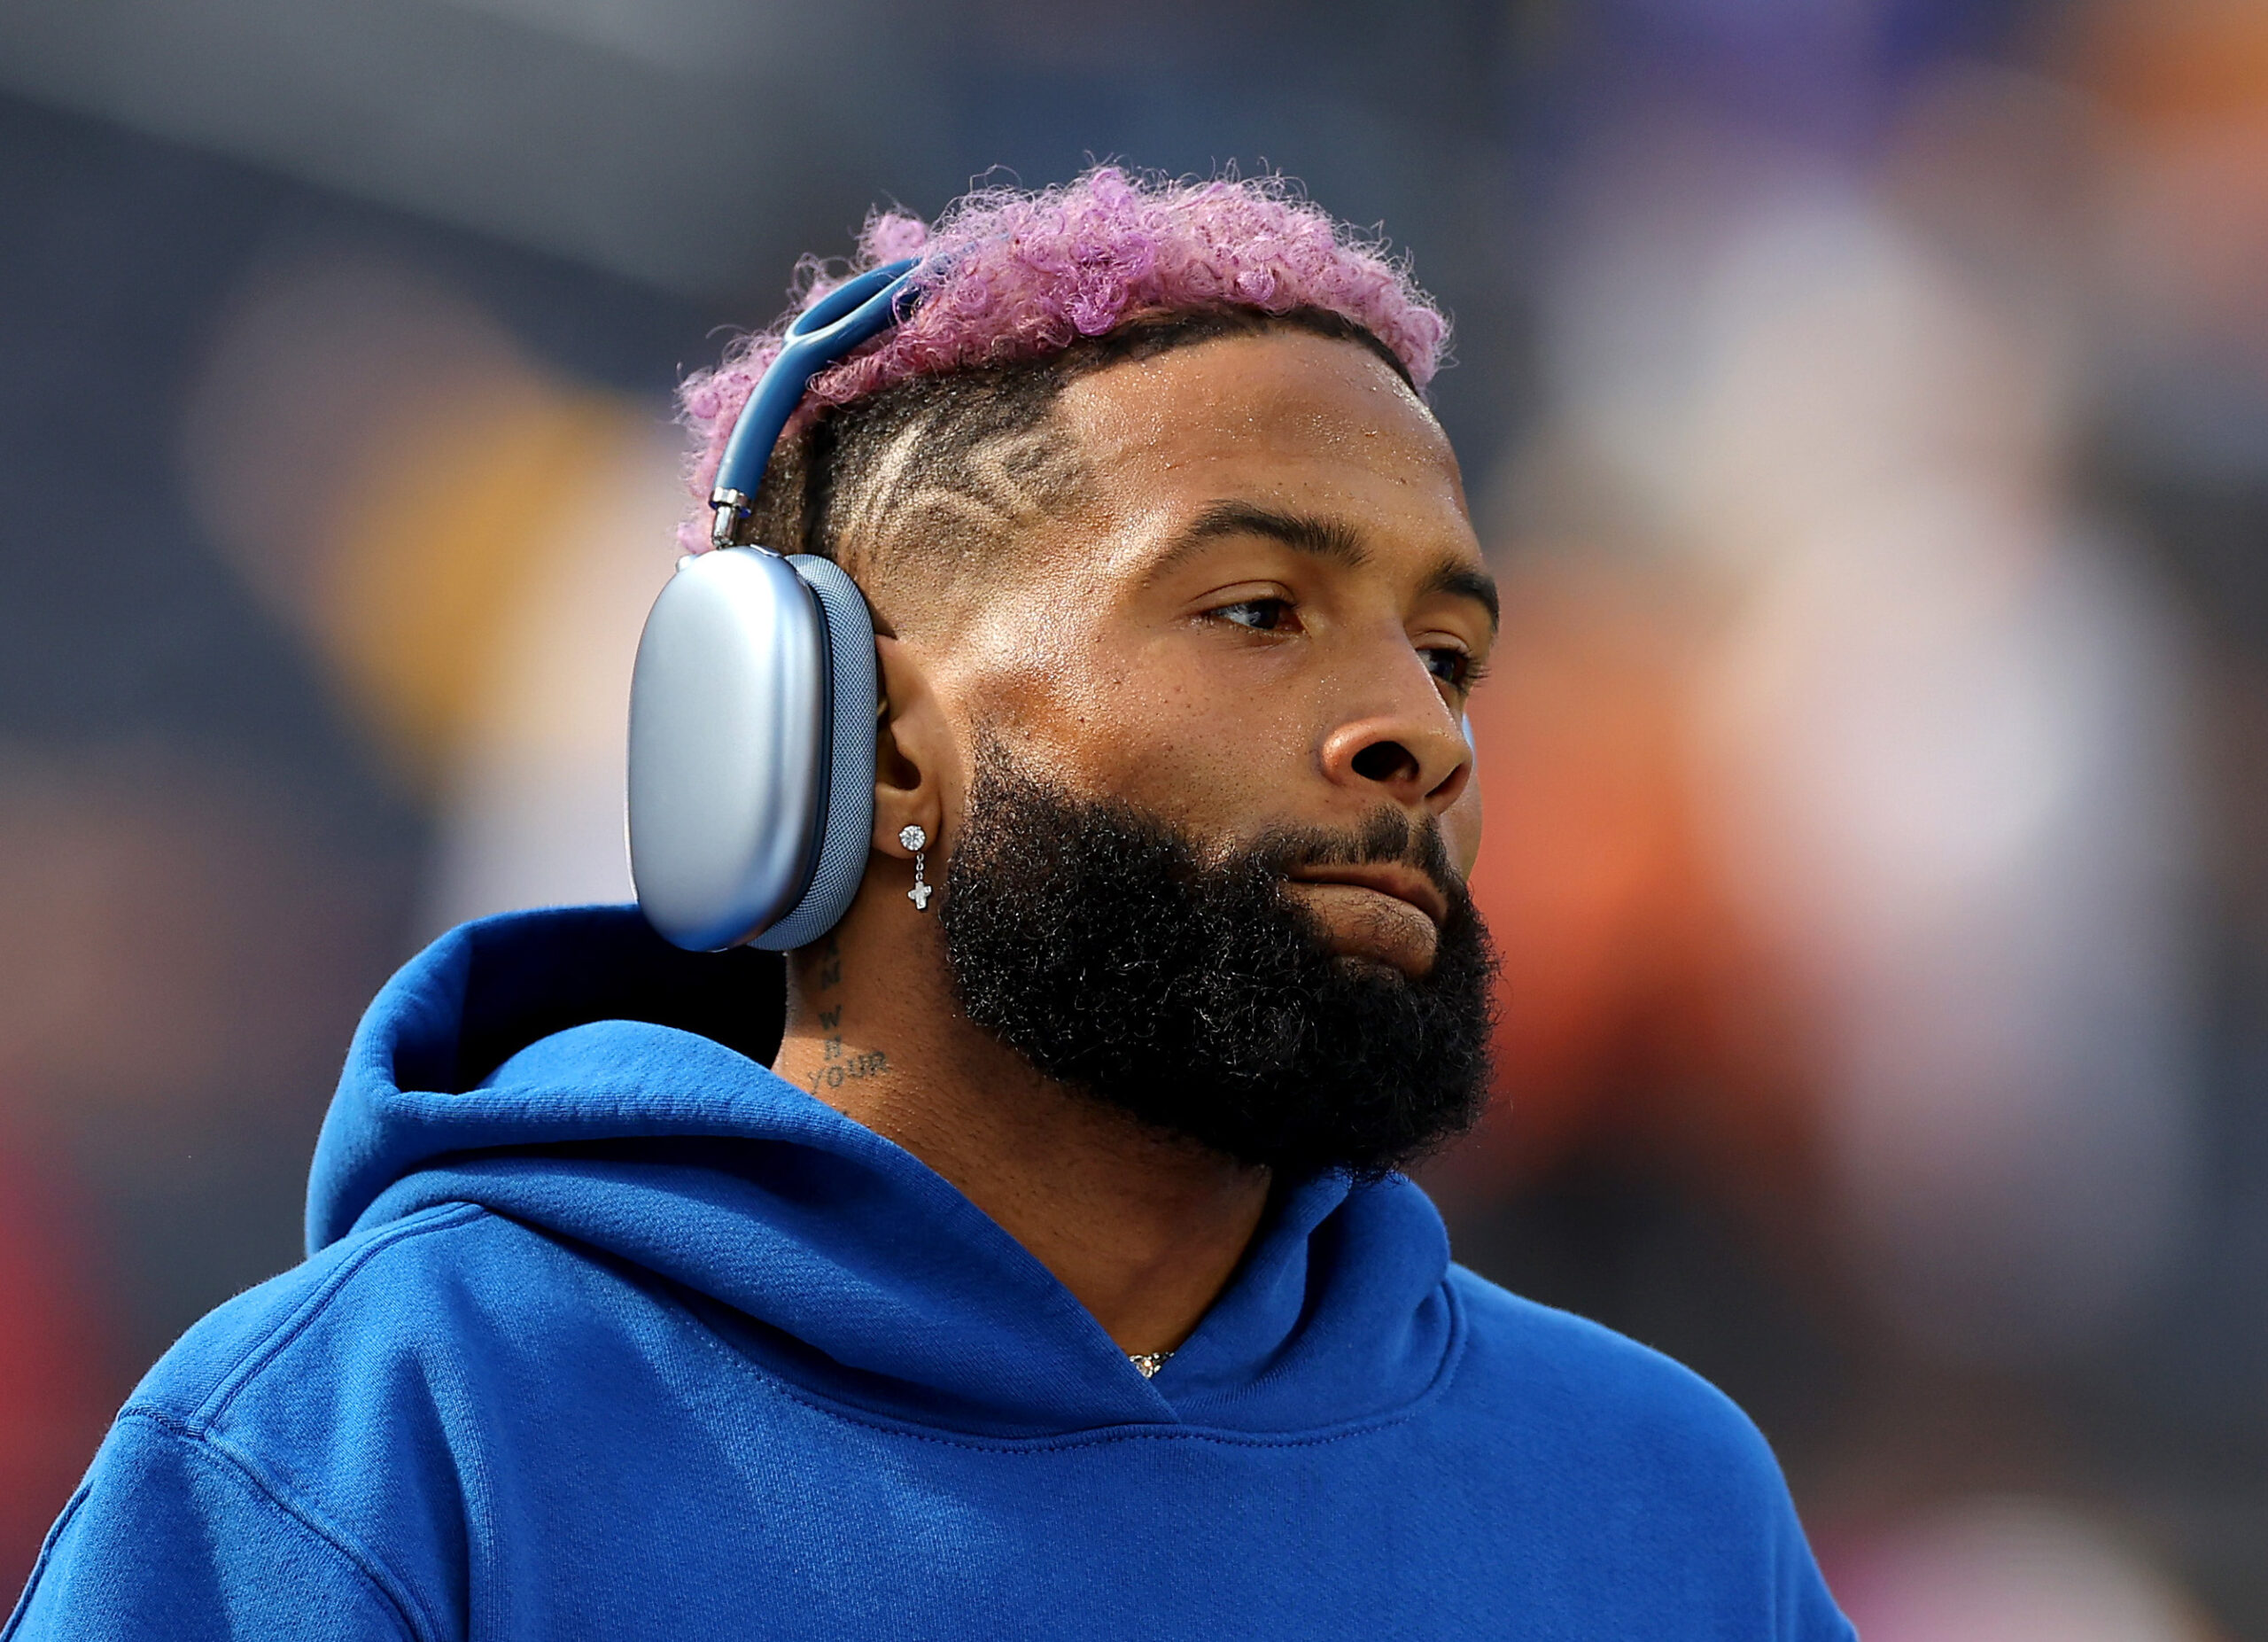 Odell Beckham Jr. Accused Of Assaulting Woman At L.A. Hotspot, He Denies It: Report